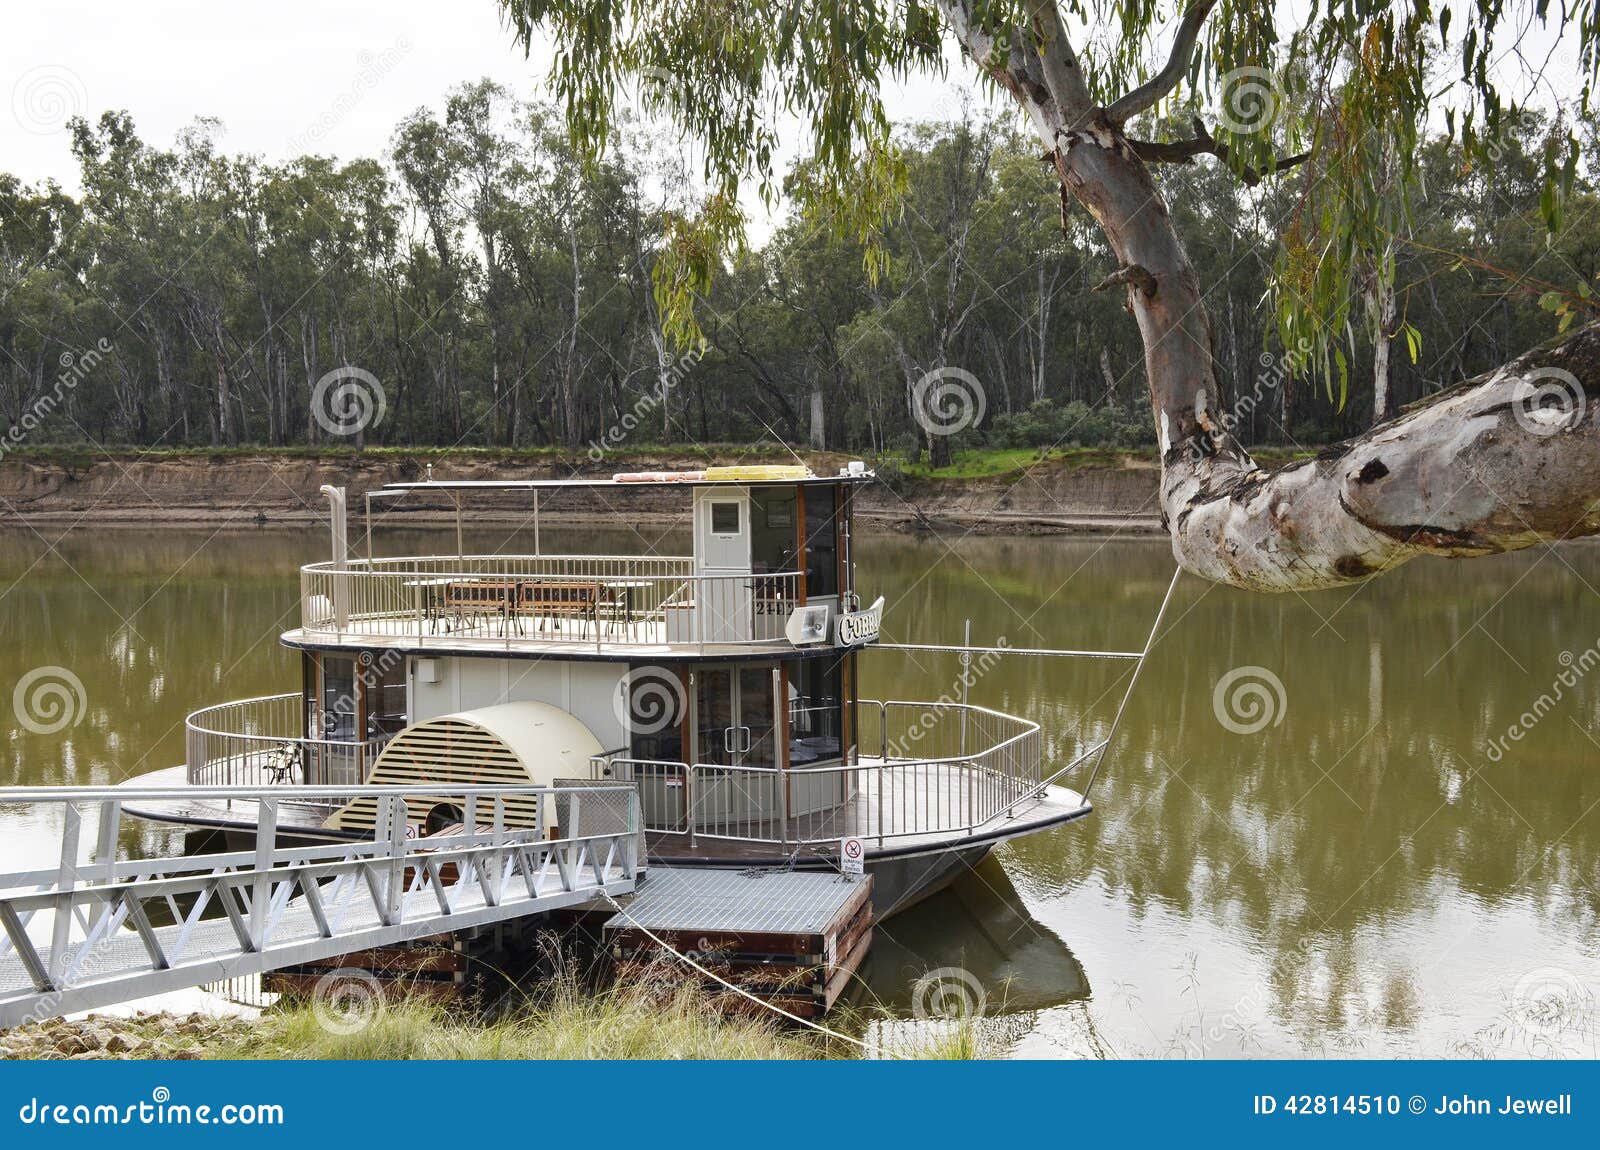 Paddle boat tied up on the Murray River Australia.